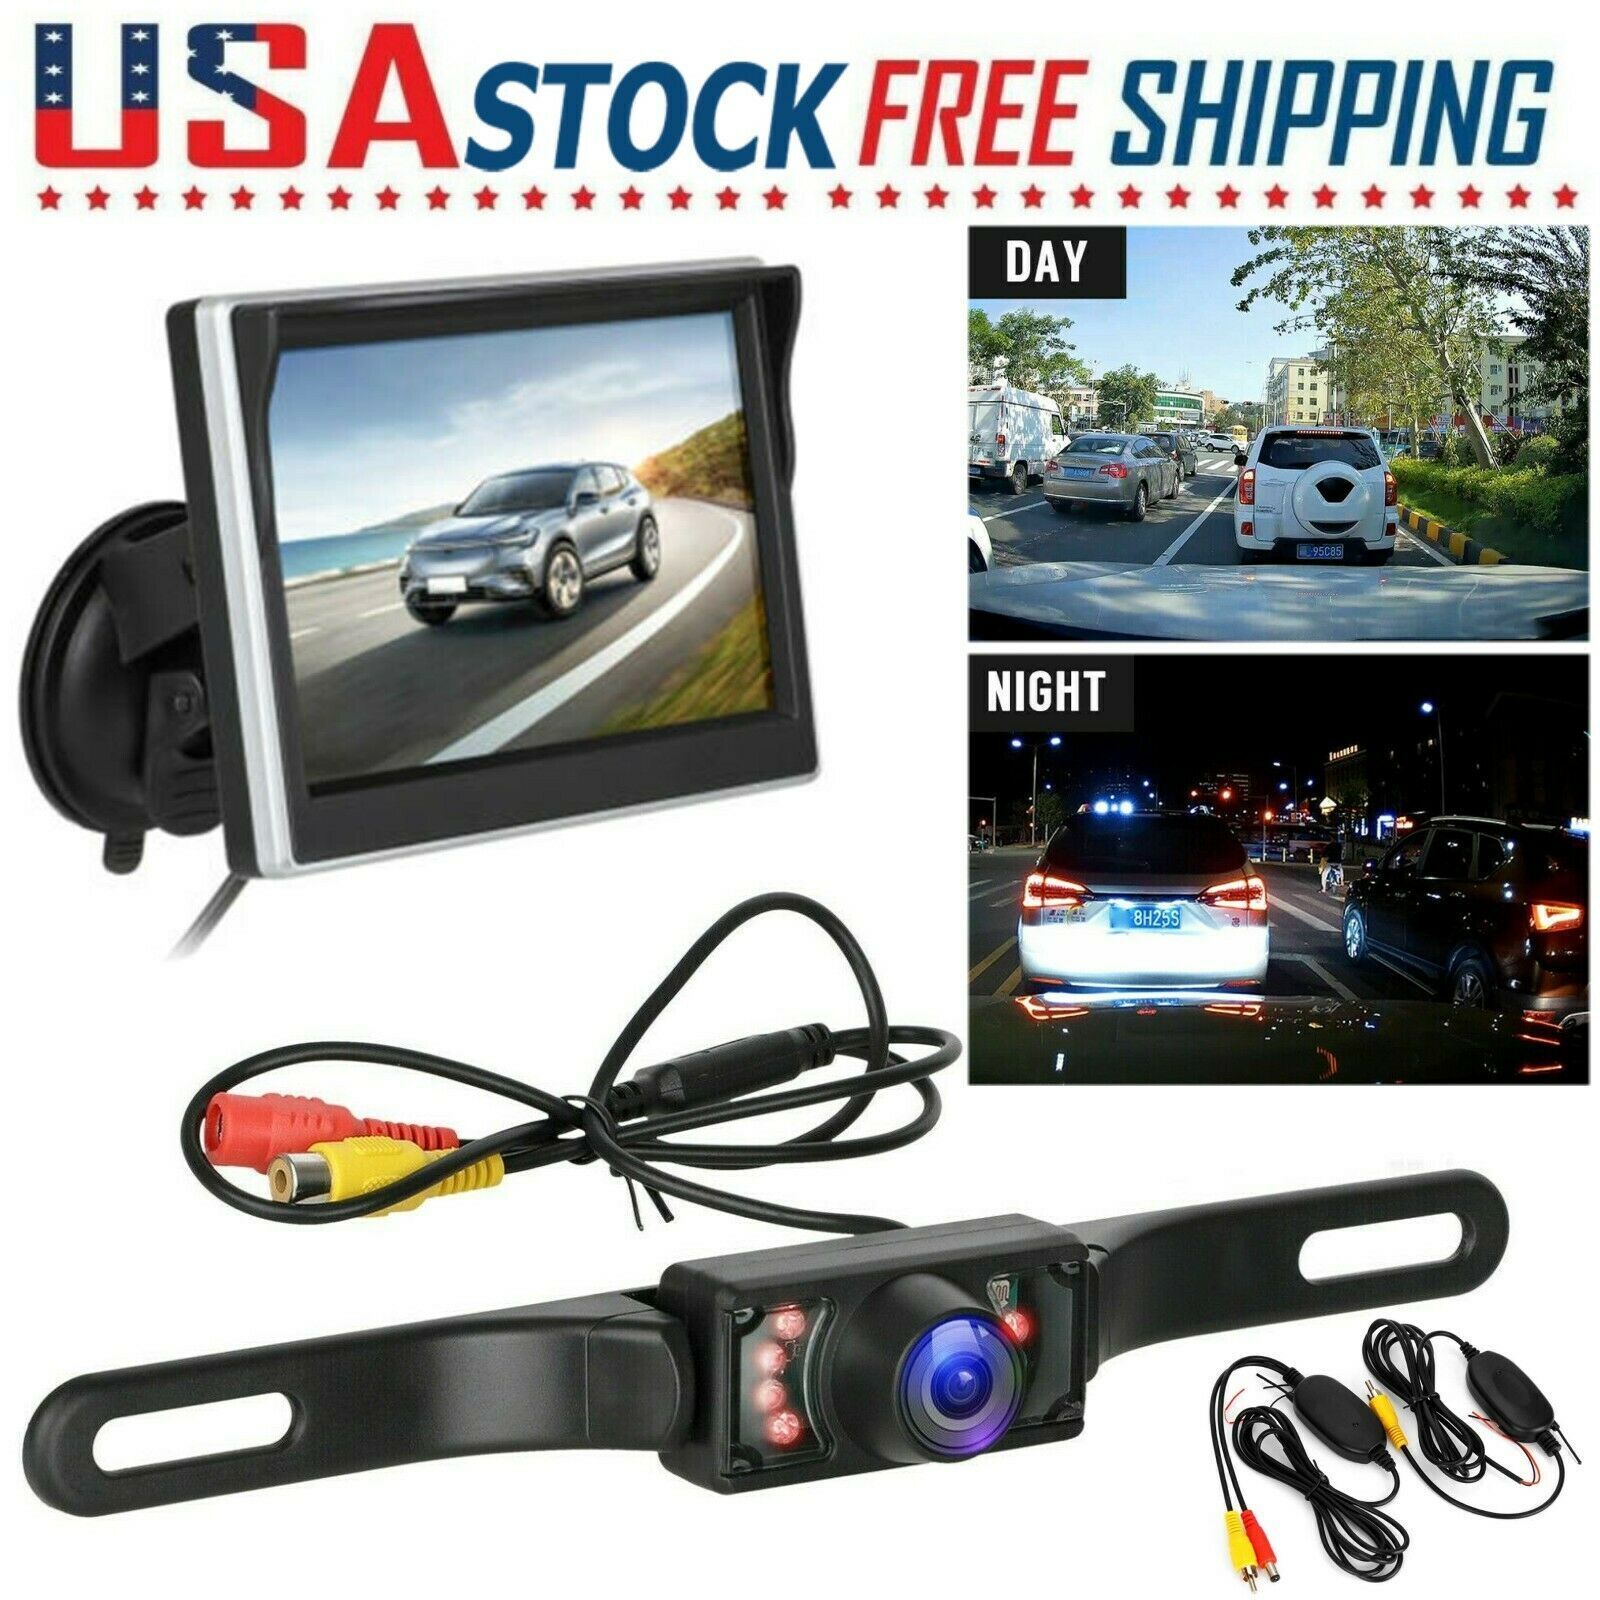 Wireless Car Rear View Backup Camera Parking System Night Vision +5